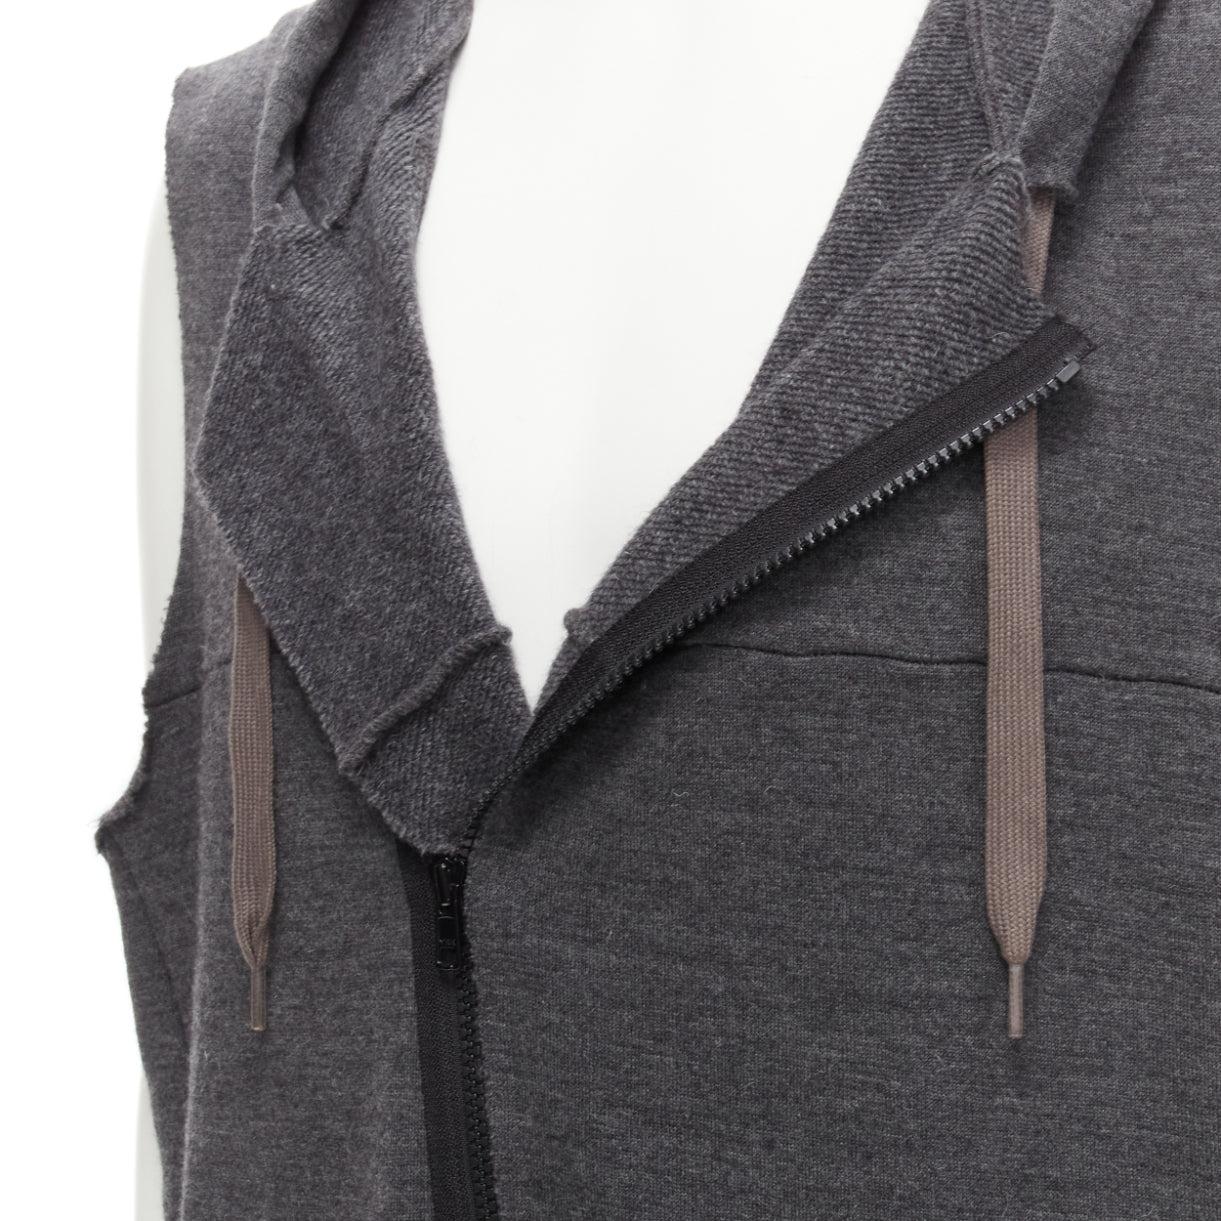 UNDERCOVER 2007 wool angora blend raw edge sleeve hooded vest JP3 L
Reference: CAWG/A00297
Brand: Undercover
Collection: FW 2007
Material: Wool, Angora, Blend
Color: Grey
Pattern: Solid
Closure: Zip
Made in: Japan

CONDITION:
Condition: Excellent,